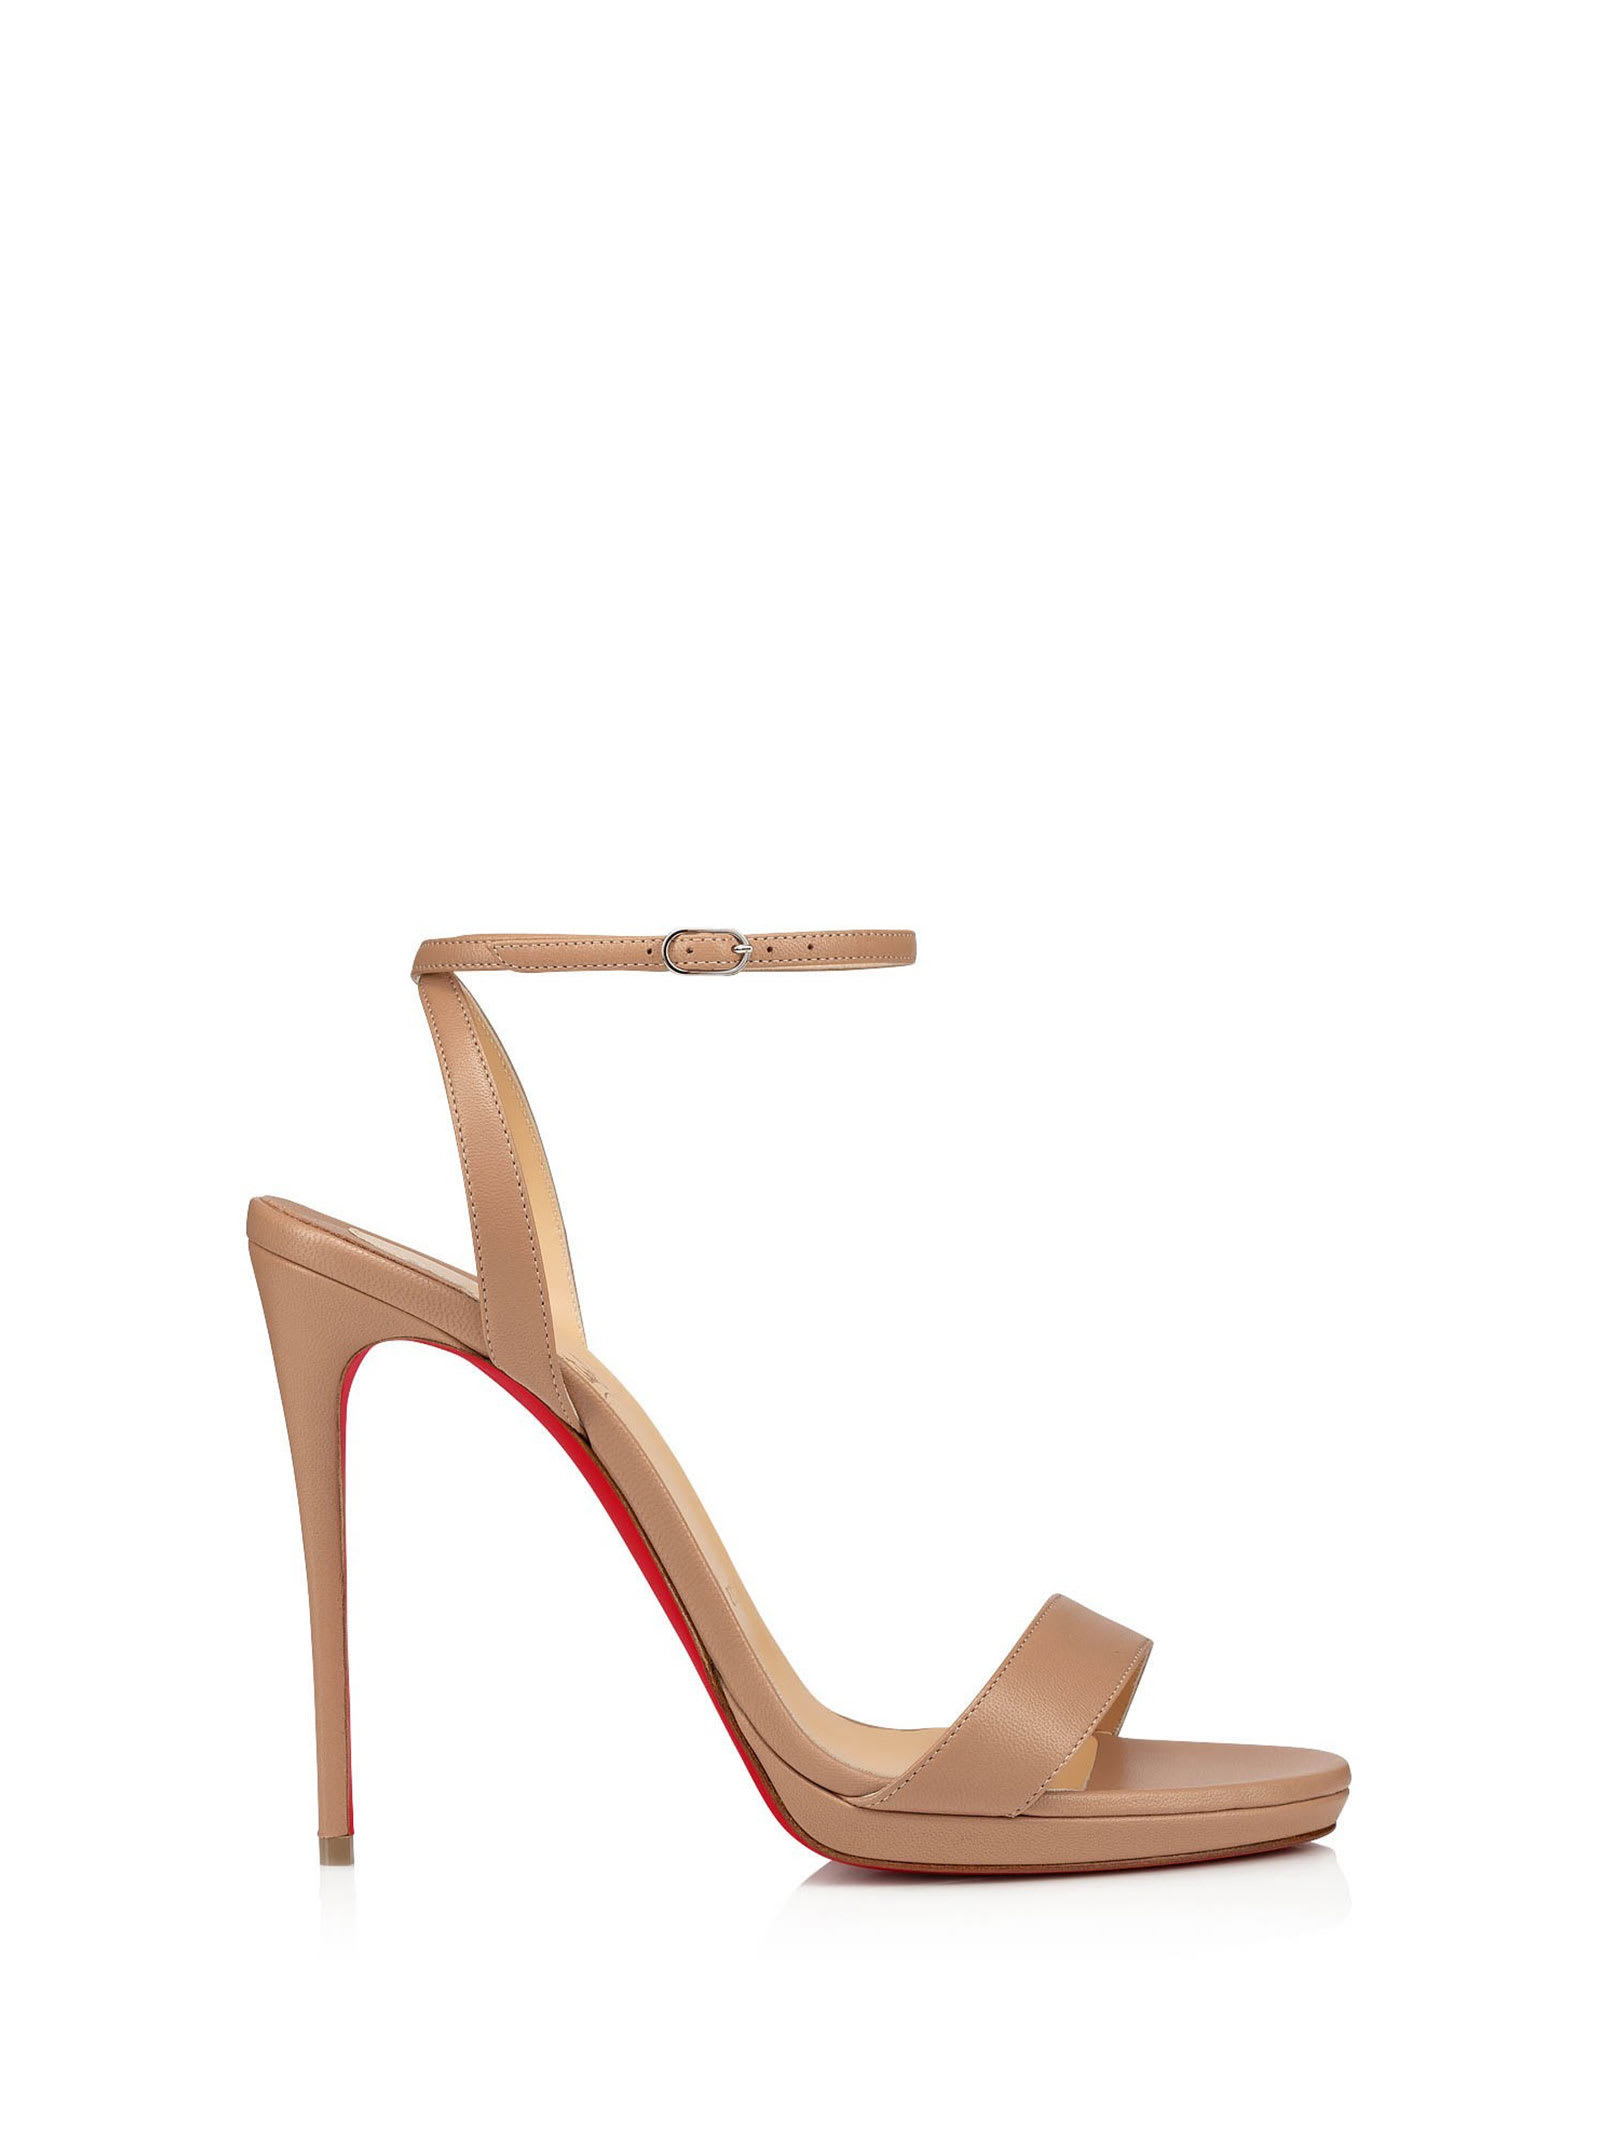 Queen Sandal In Nappa Leather